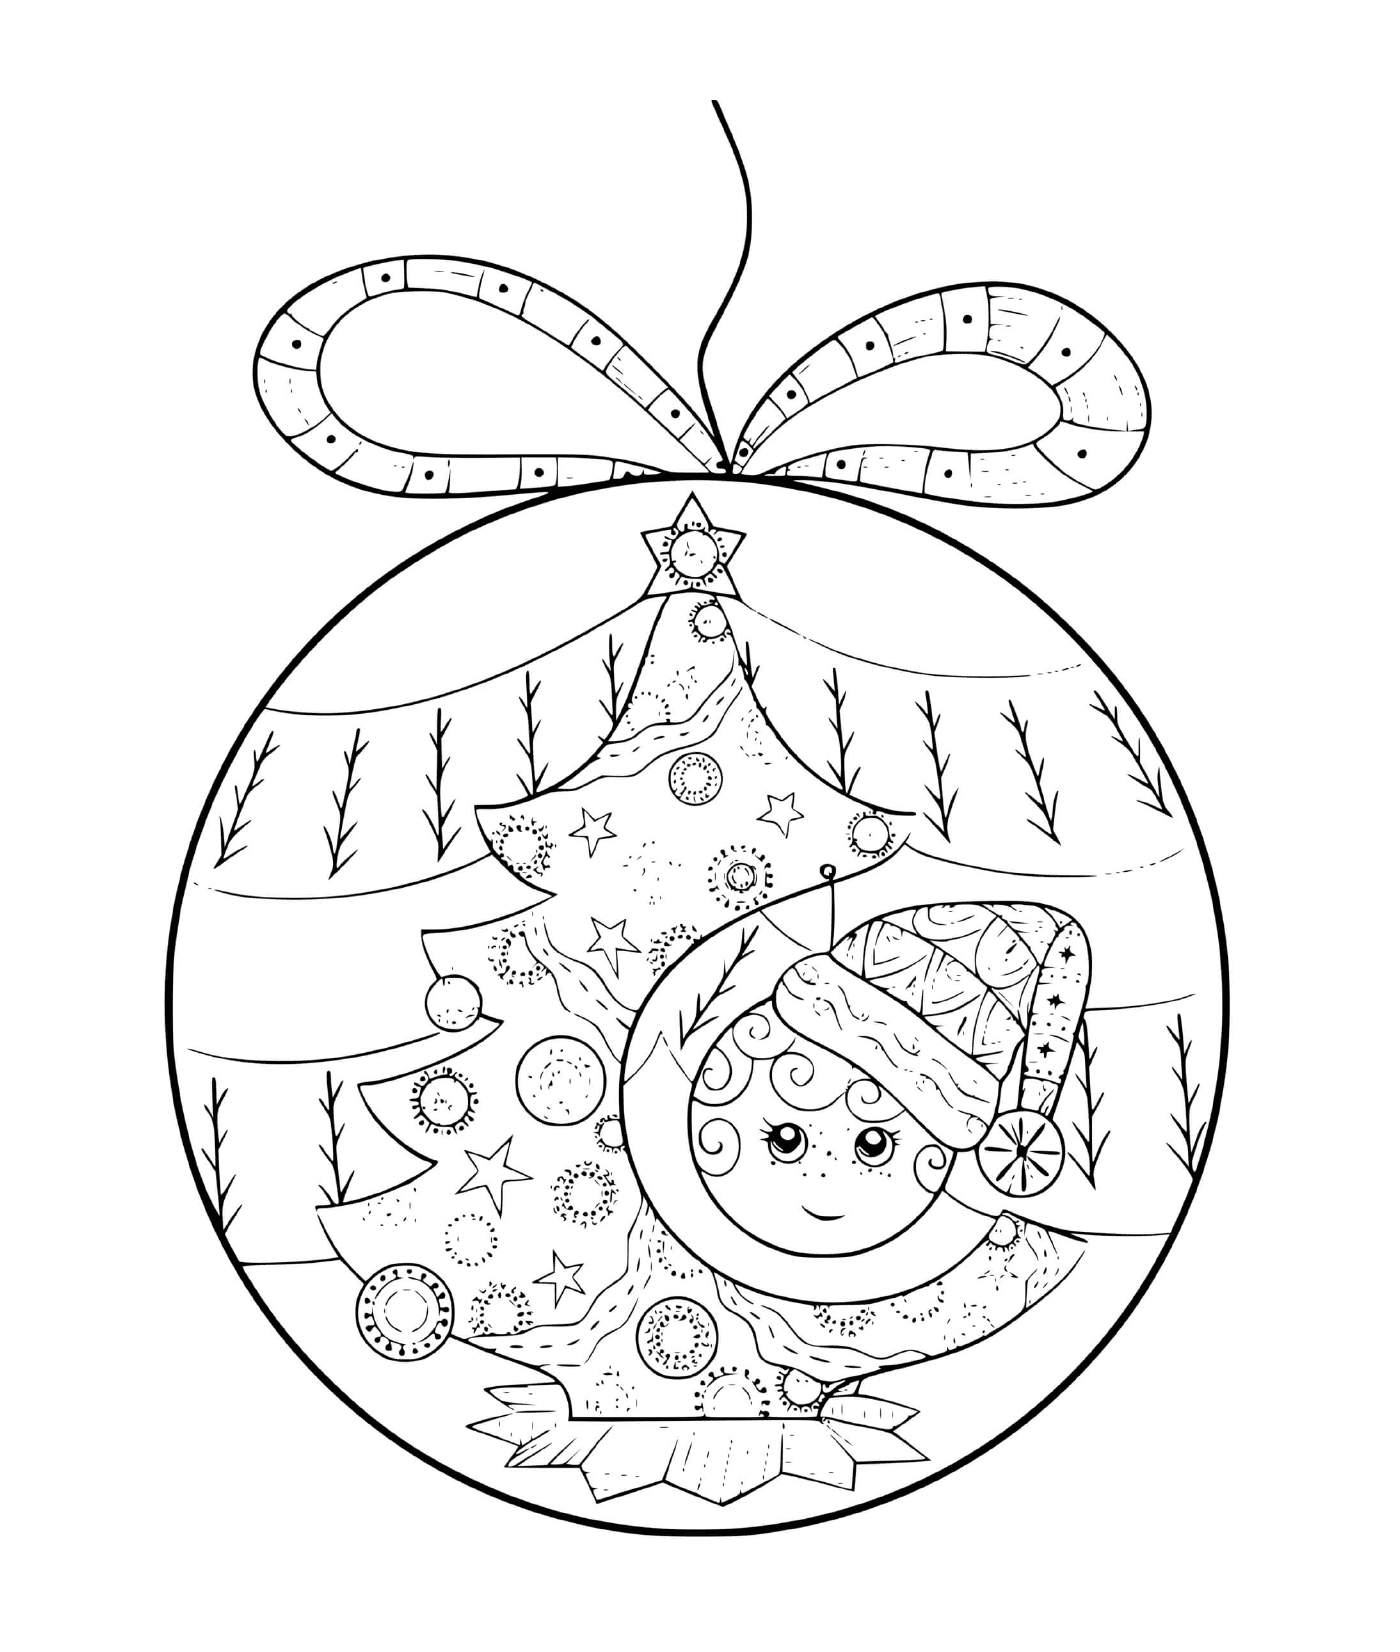  A Christmas ball with a child and a tree 